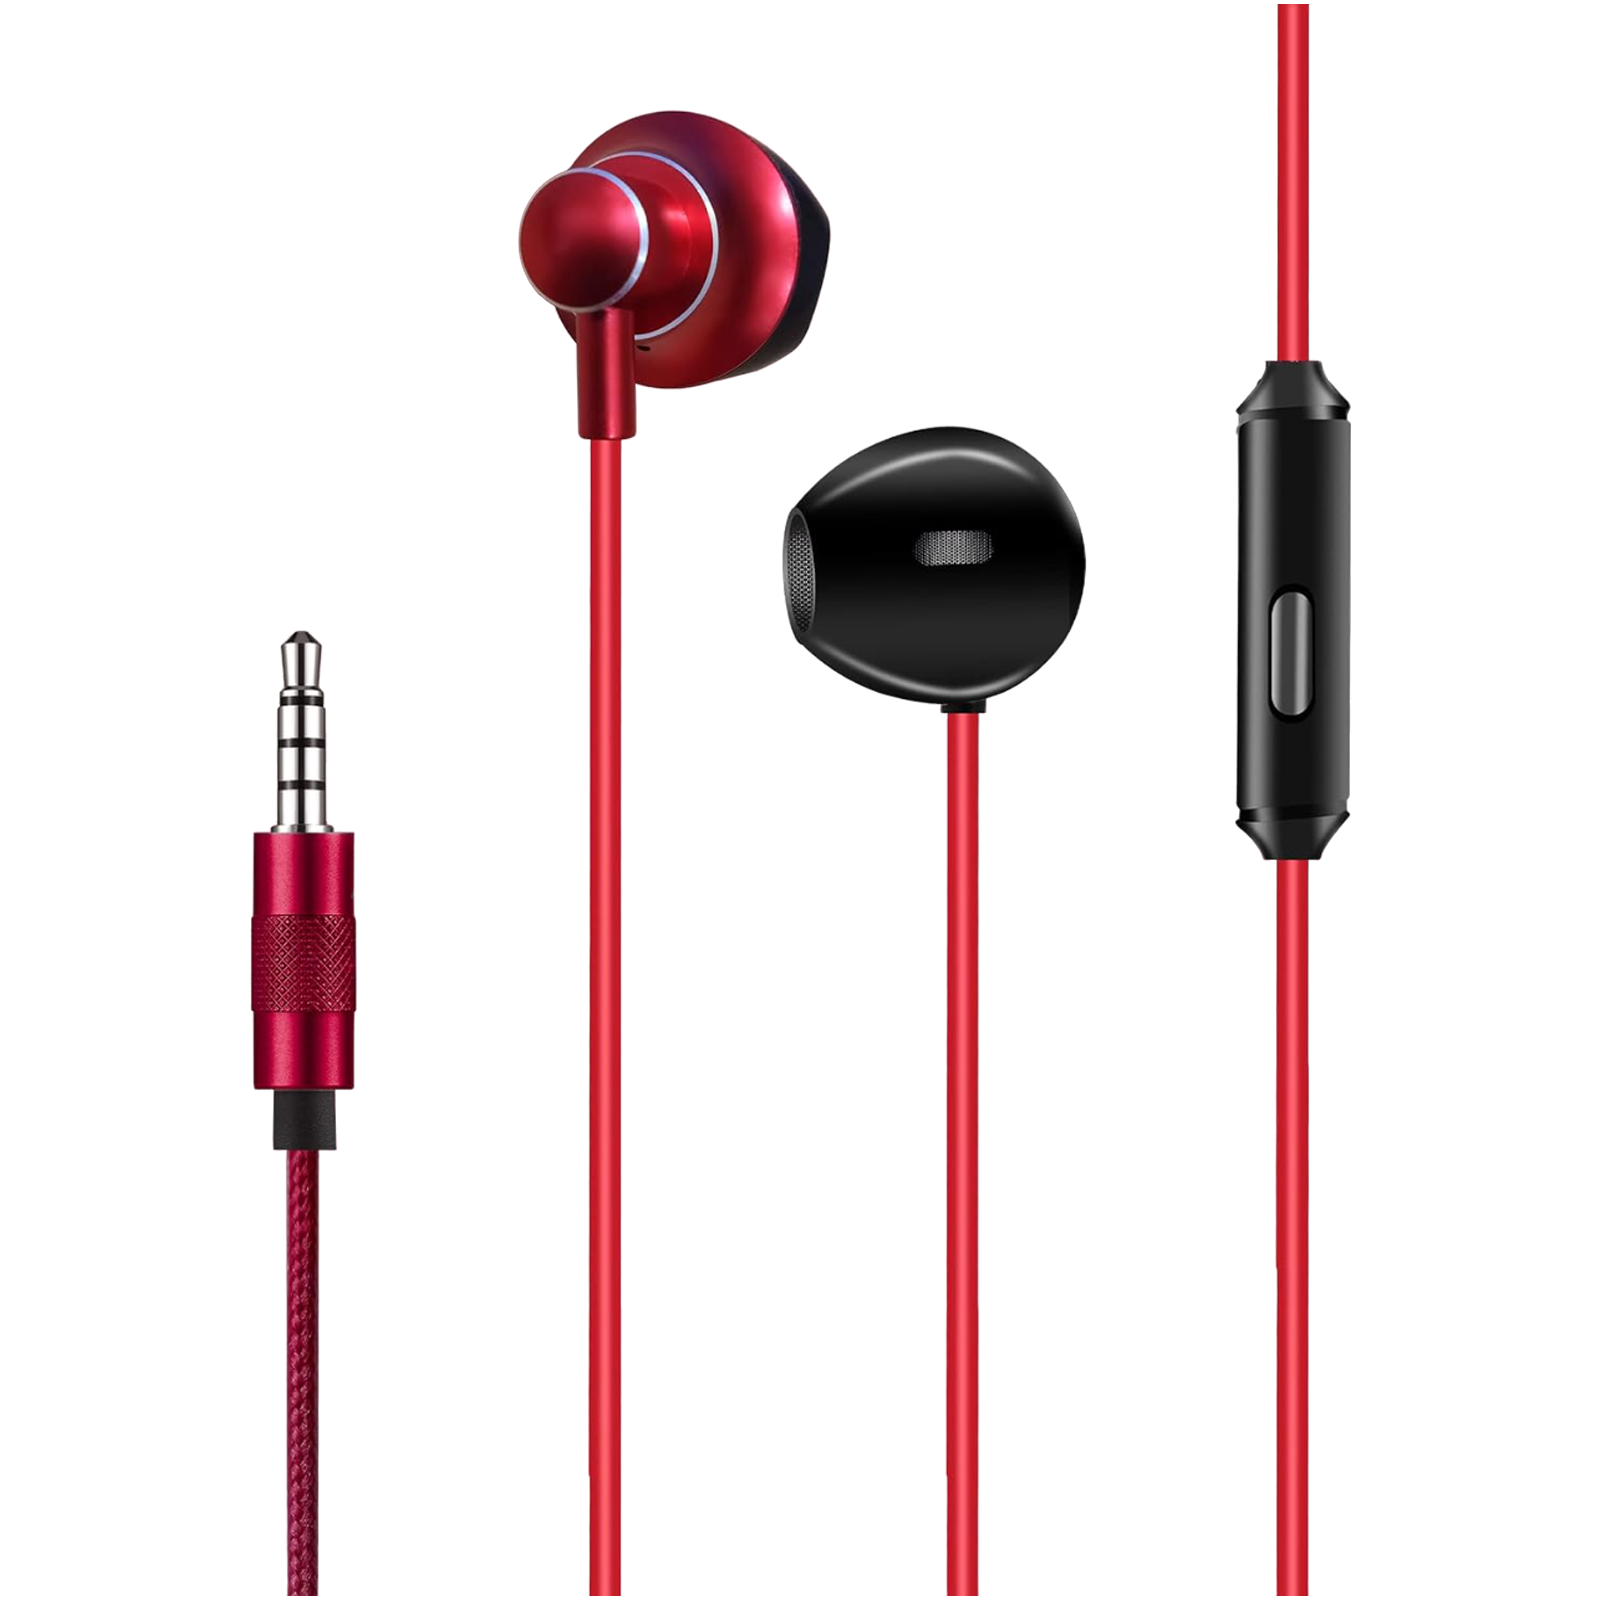 Foxin Bass Pro Plus M6 Wired Earphone with Mic (In Ear, Black and Red)